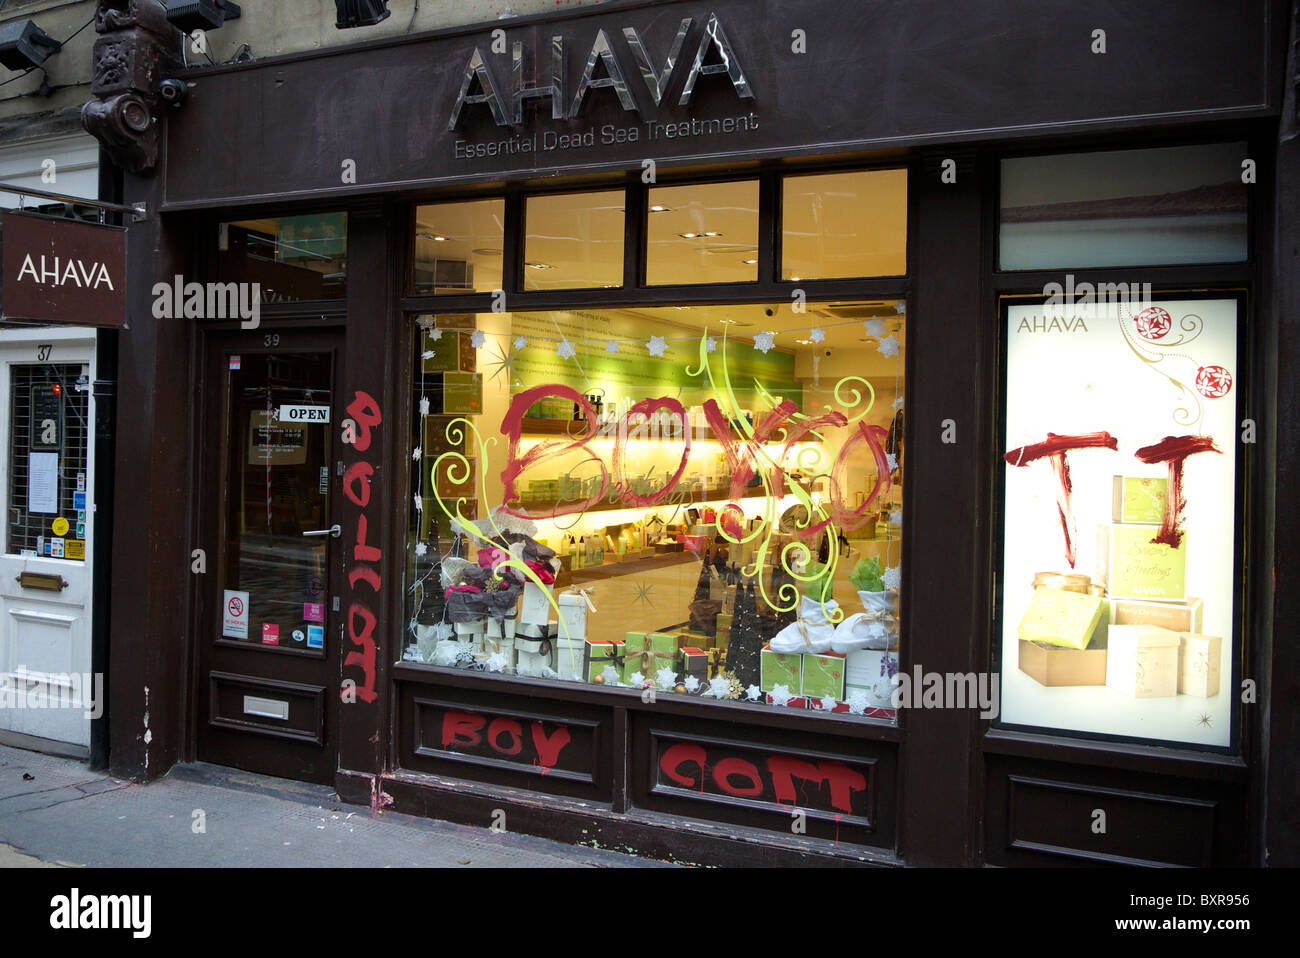 Entrance to the Ahava store which has been daubed in graffiti to boycott the store  Monmouth Street Covent Garden London Stock Photo